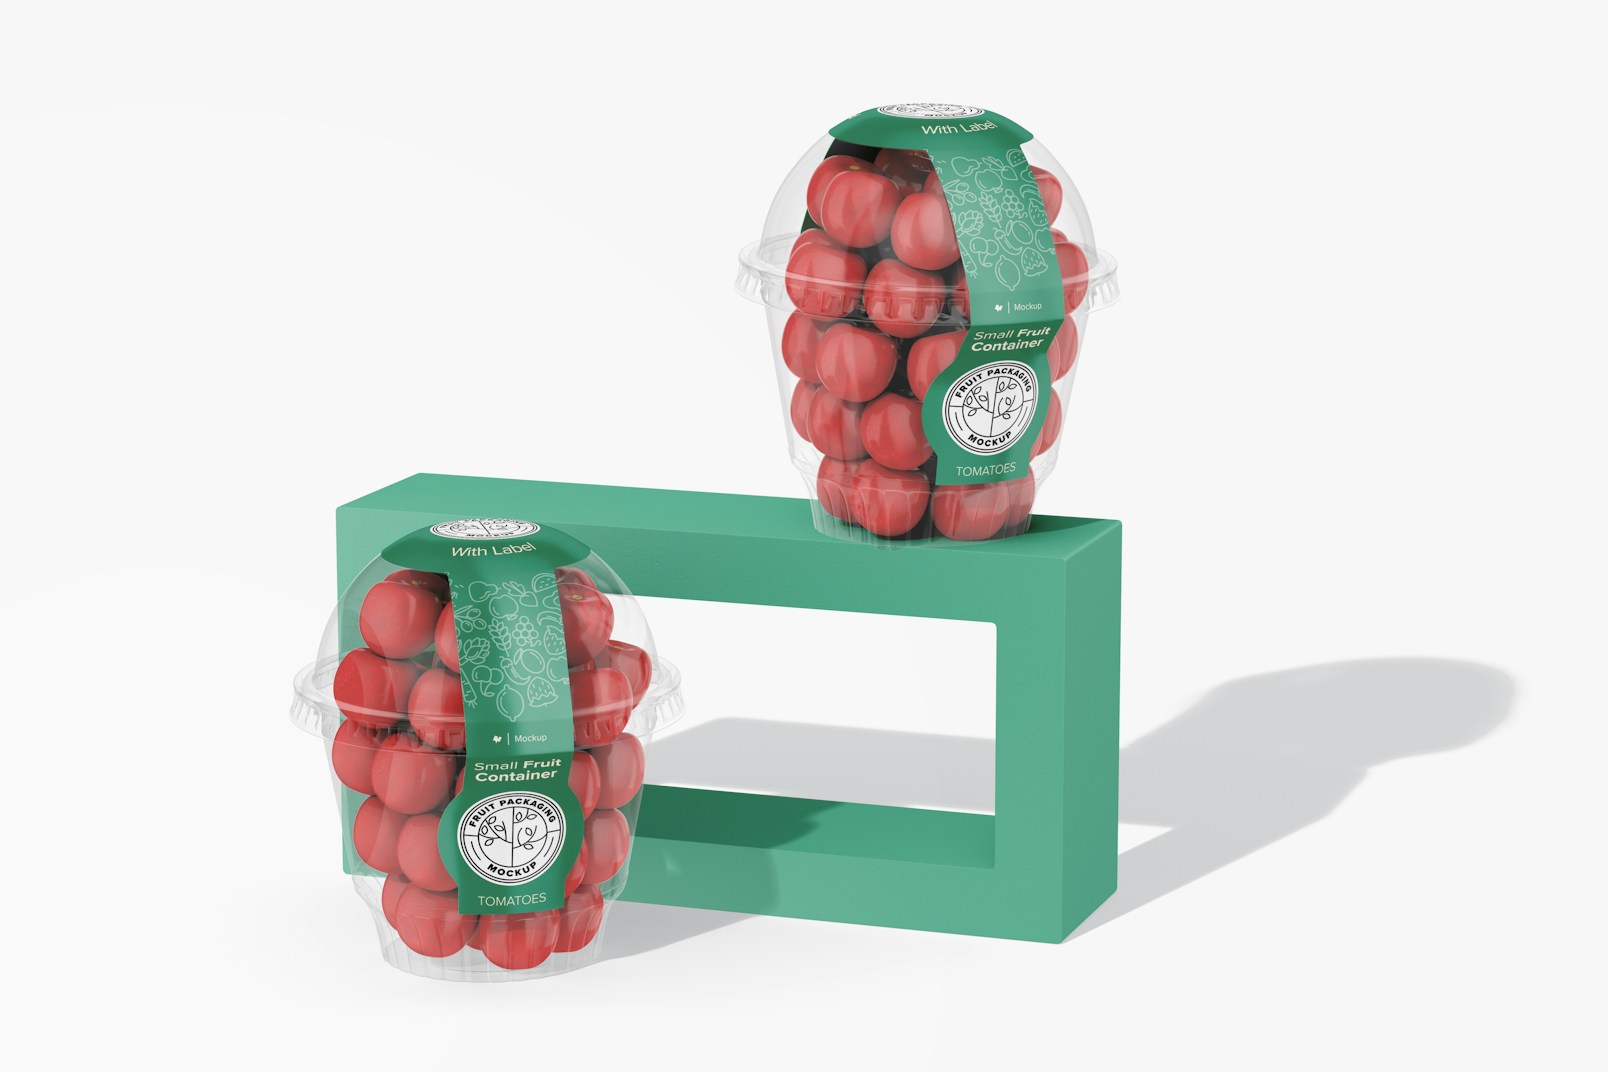 Small Fruit Containers With Lid Mockup, on Podium